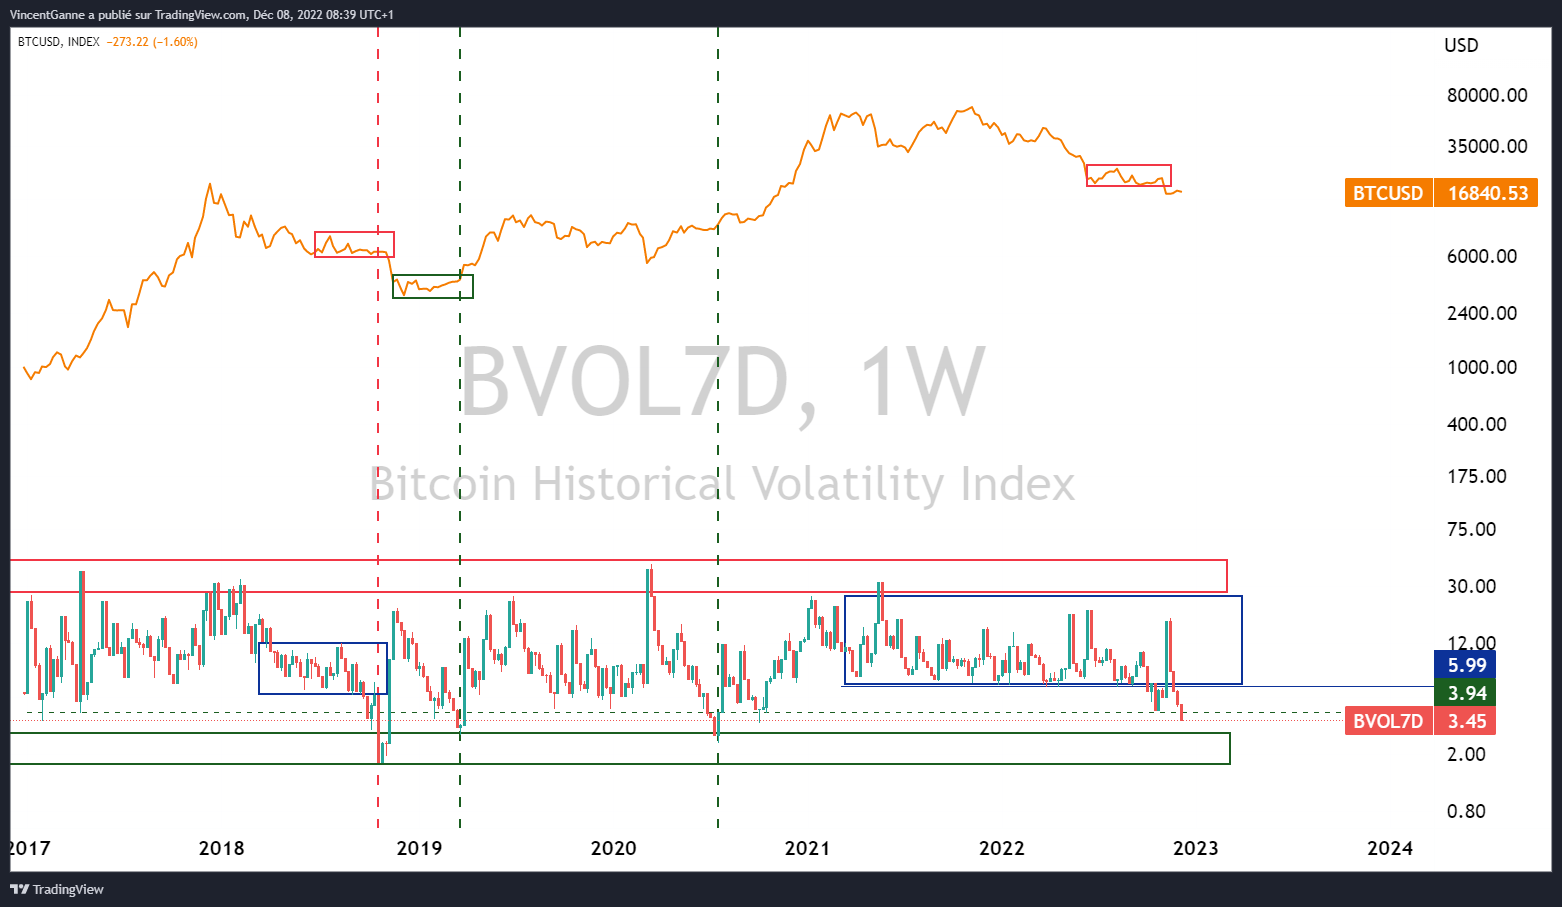 Chart that shows historic 7-day volatility in weekly Bitcoin price data